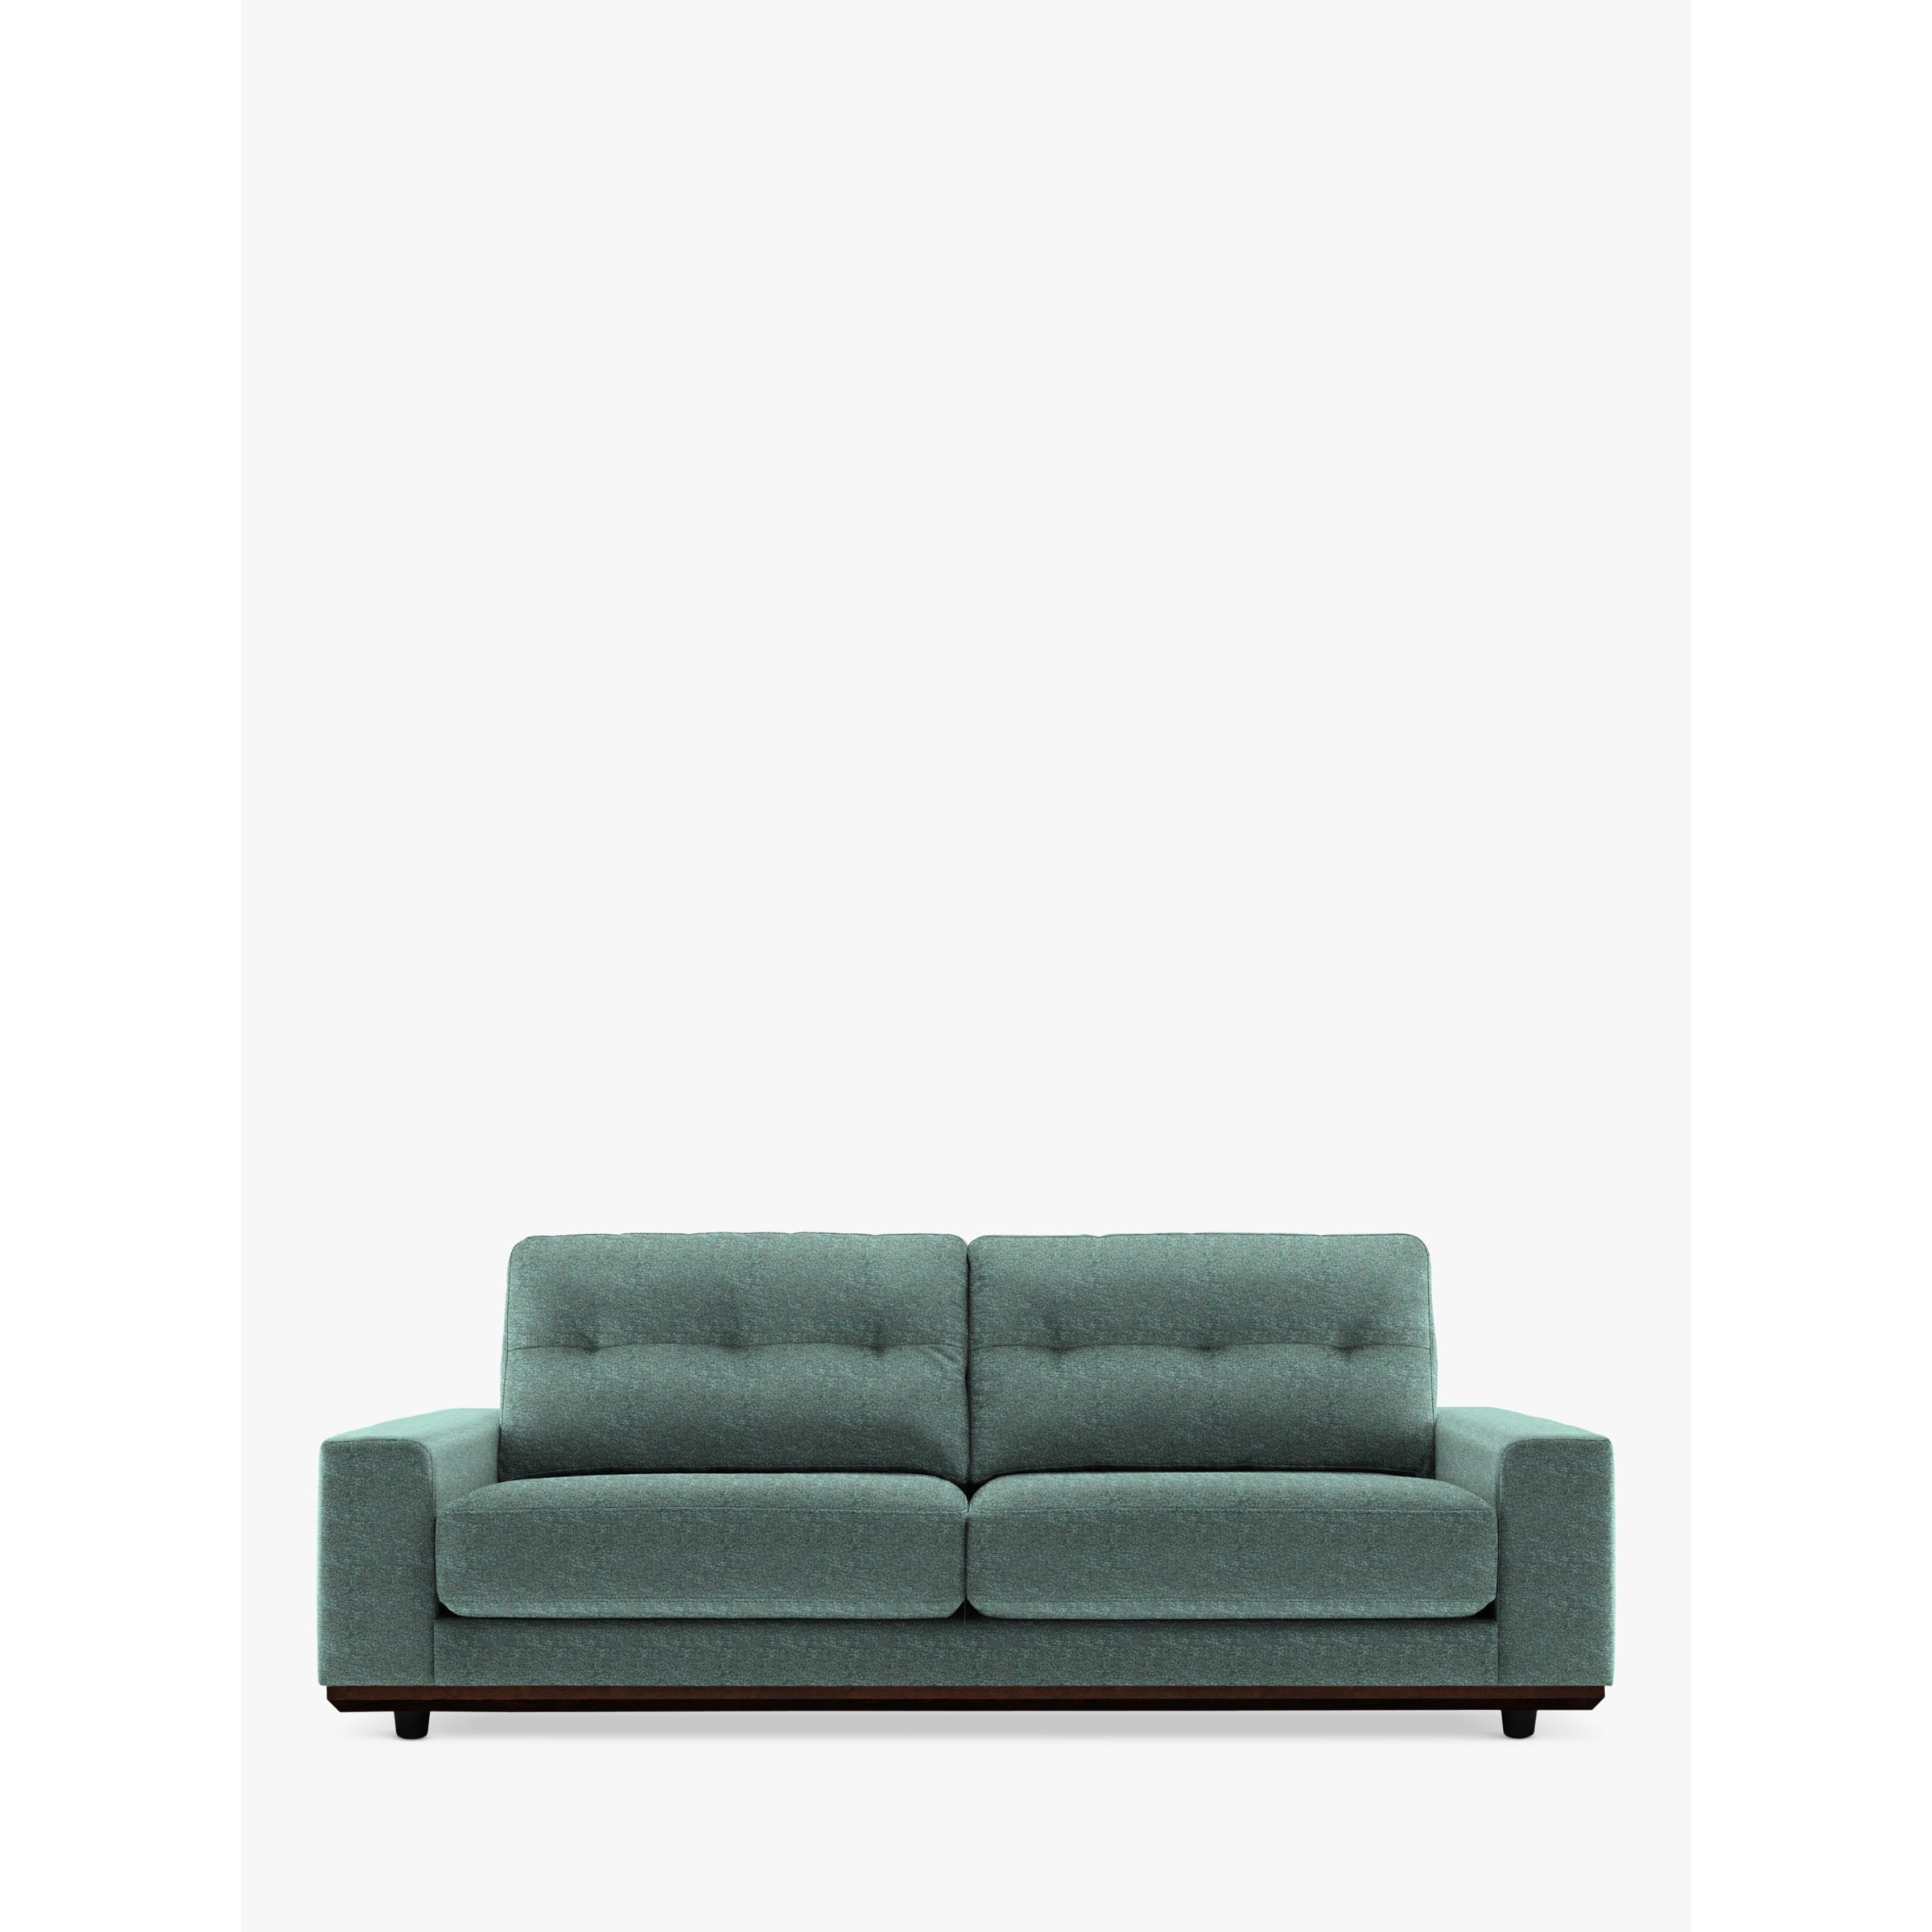 G Plan Vintage The Seventy One Large 3 Seater Sofa - image 1